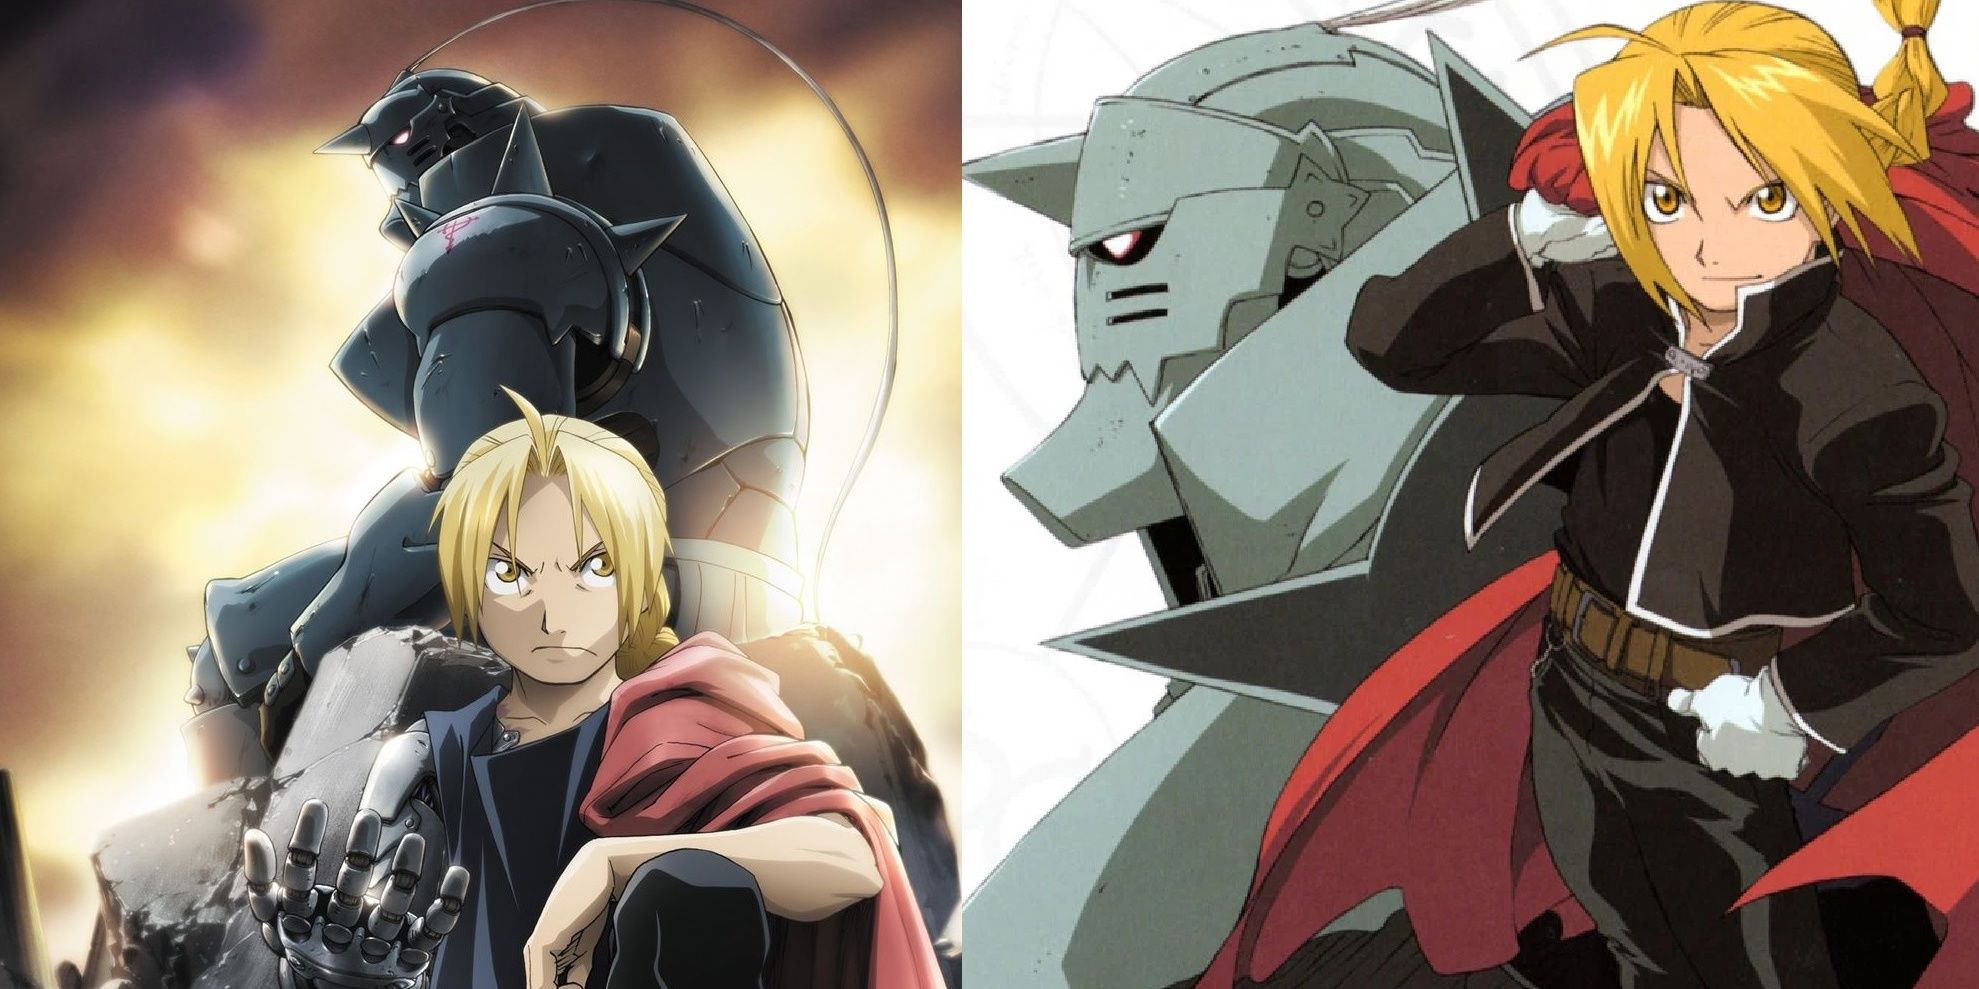 Fullmetal Alchemist Vs. Brotherhood: What's the Difference?